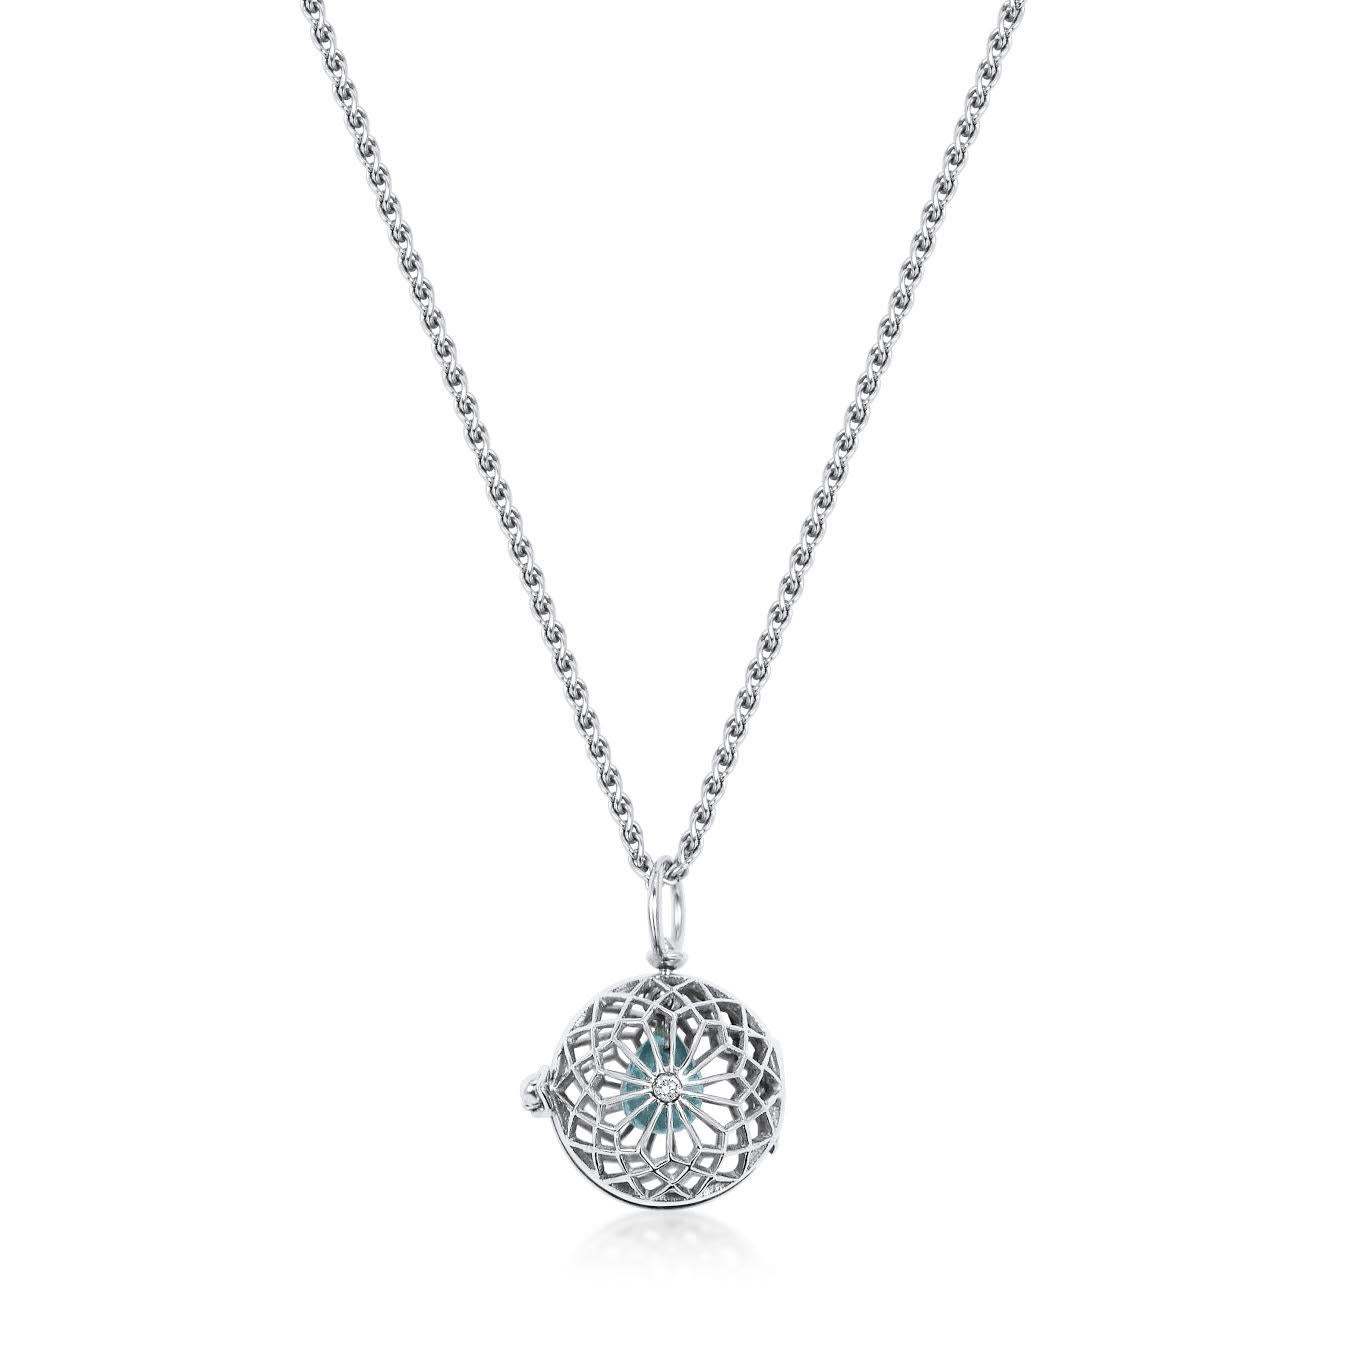 Handcrafted 1.15 Carat Aquamarine & Diamond 18 Karat White Gold Pendant Necklace. Inspired by the gesture of giving someone your heart and for them to keep it safe. A drop of Aquamarine swings in our hand pierced yellow gold cage highlighted by a